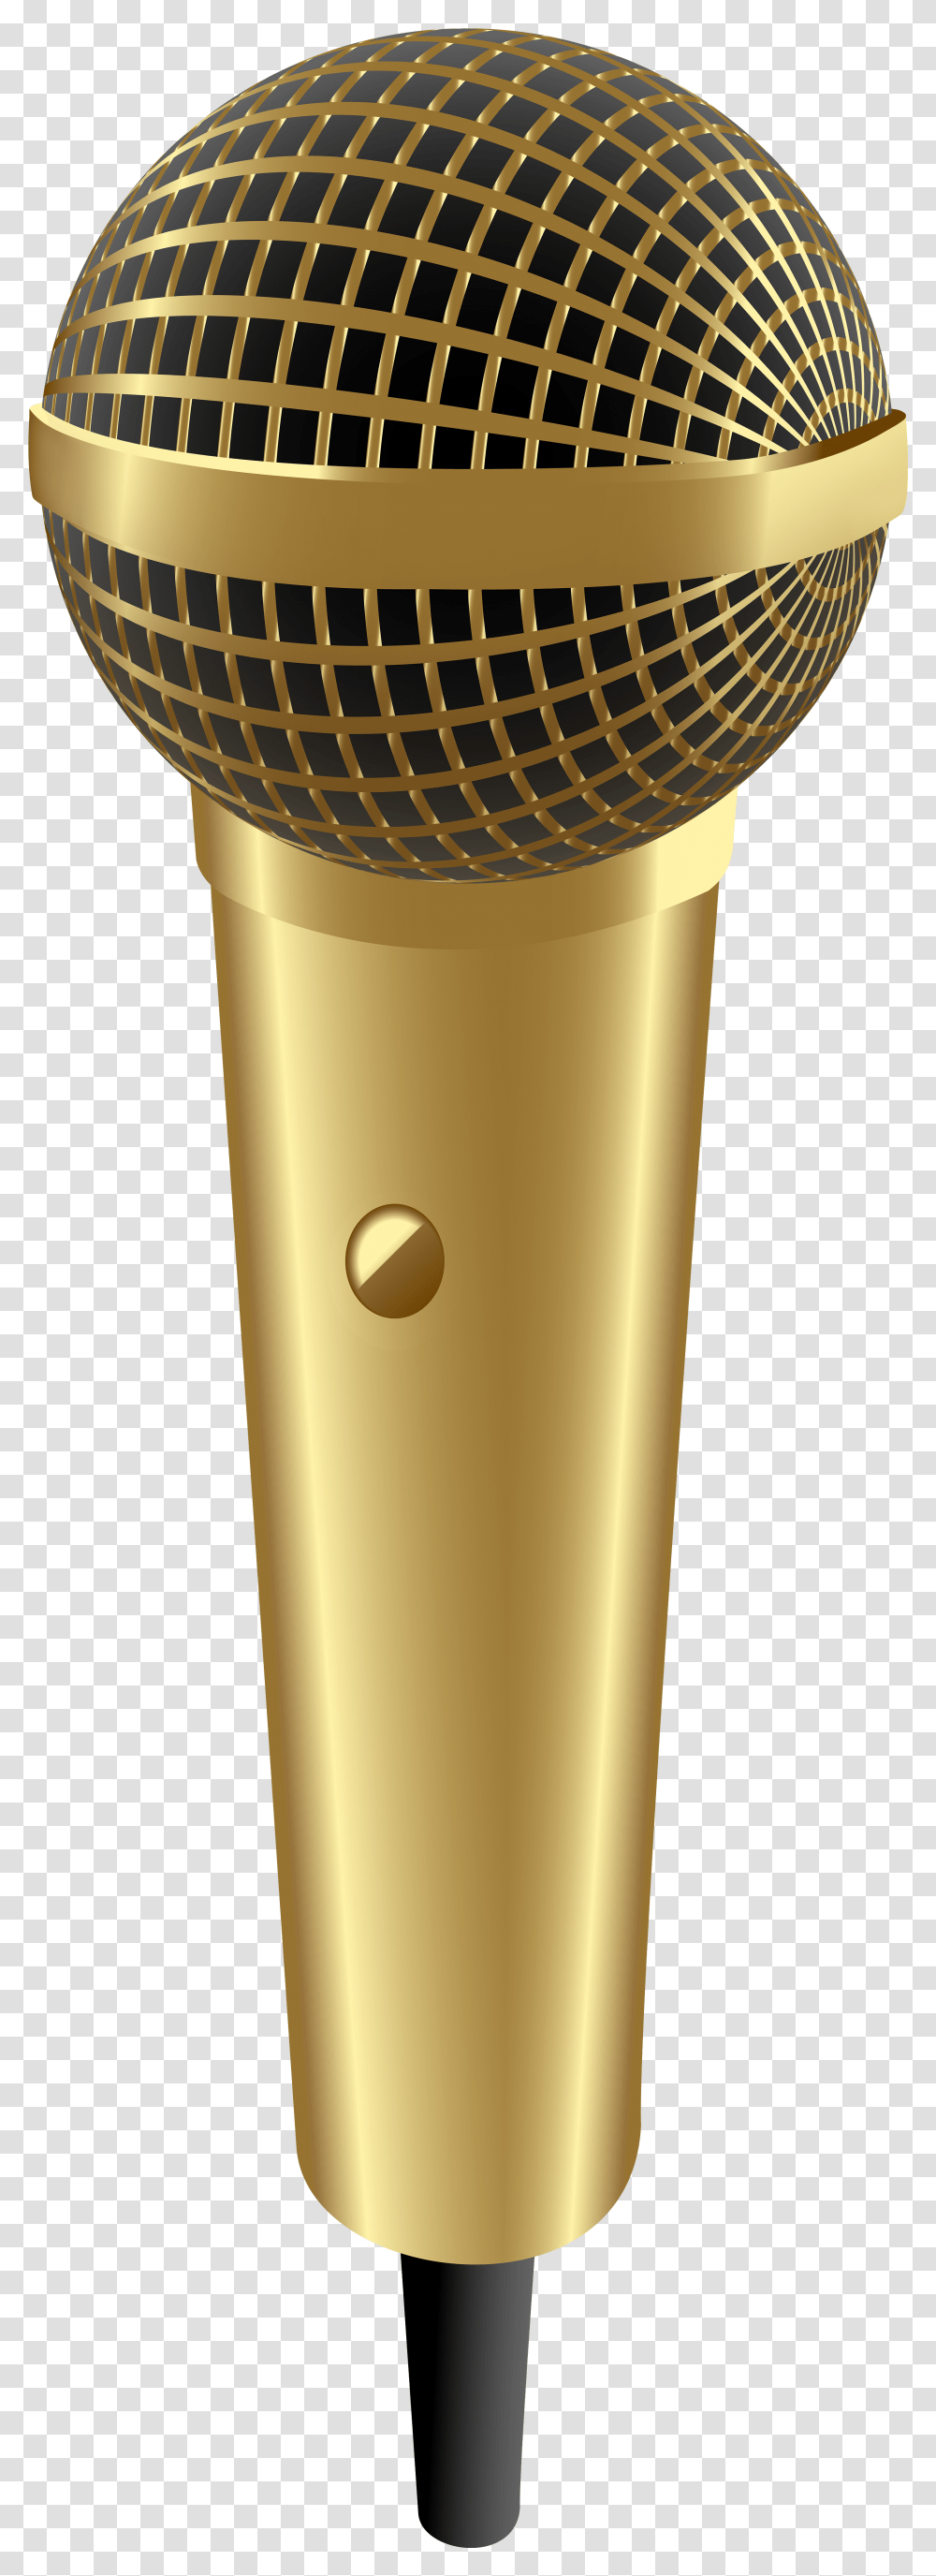 Background Microphone Clipart Gold Microphone Clipart Background Transparent Png